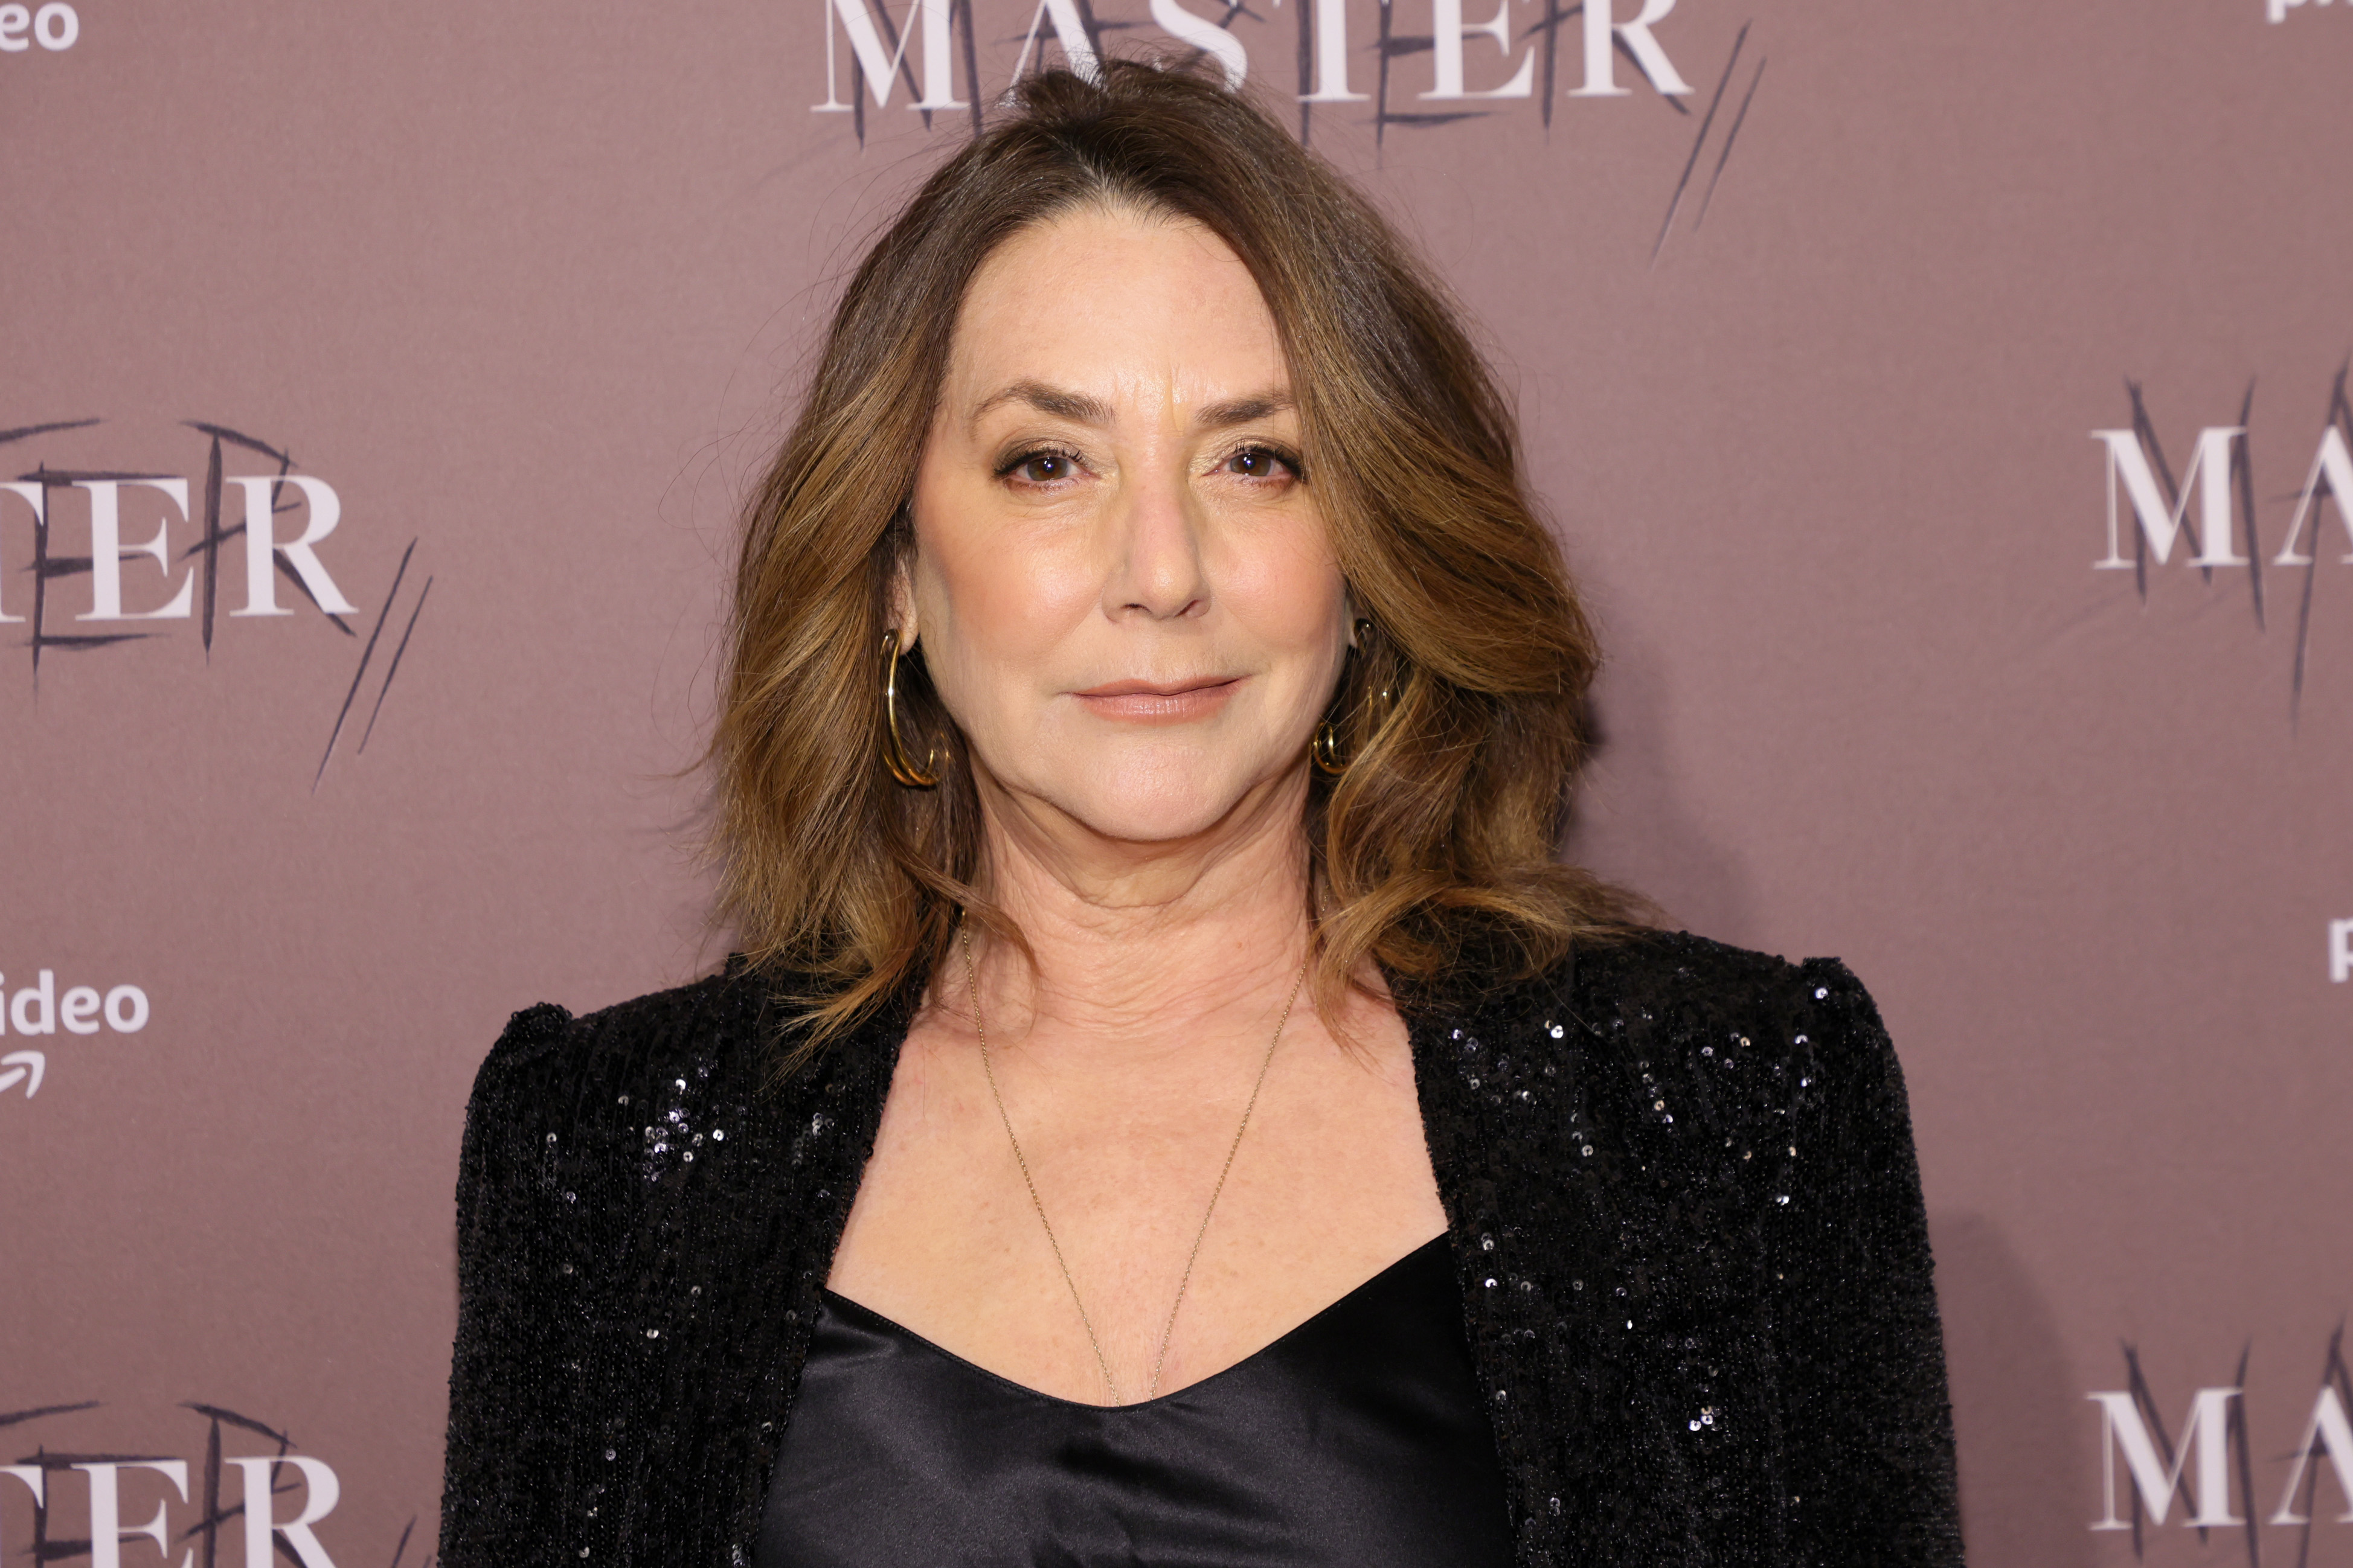 Talia Balsam at the Amazon premiere of "Master" in New York City on March 10, 2022 | Source: Getty Images